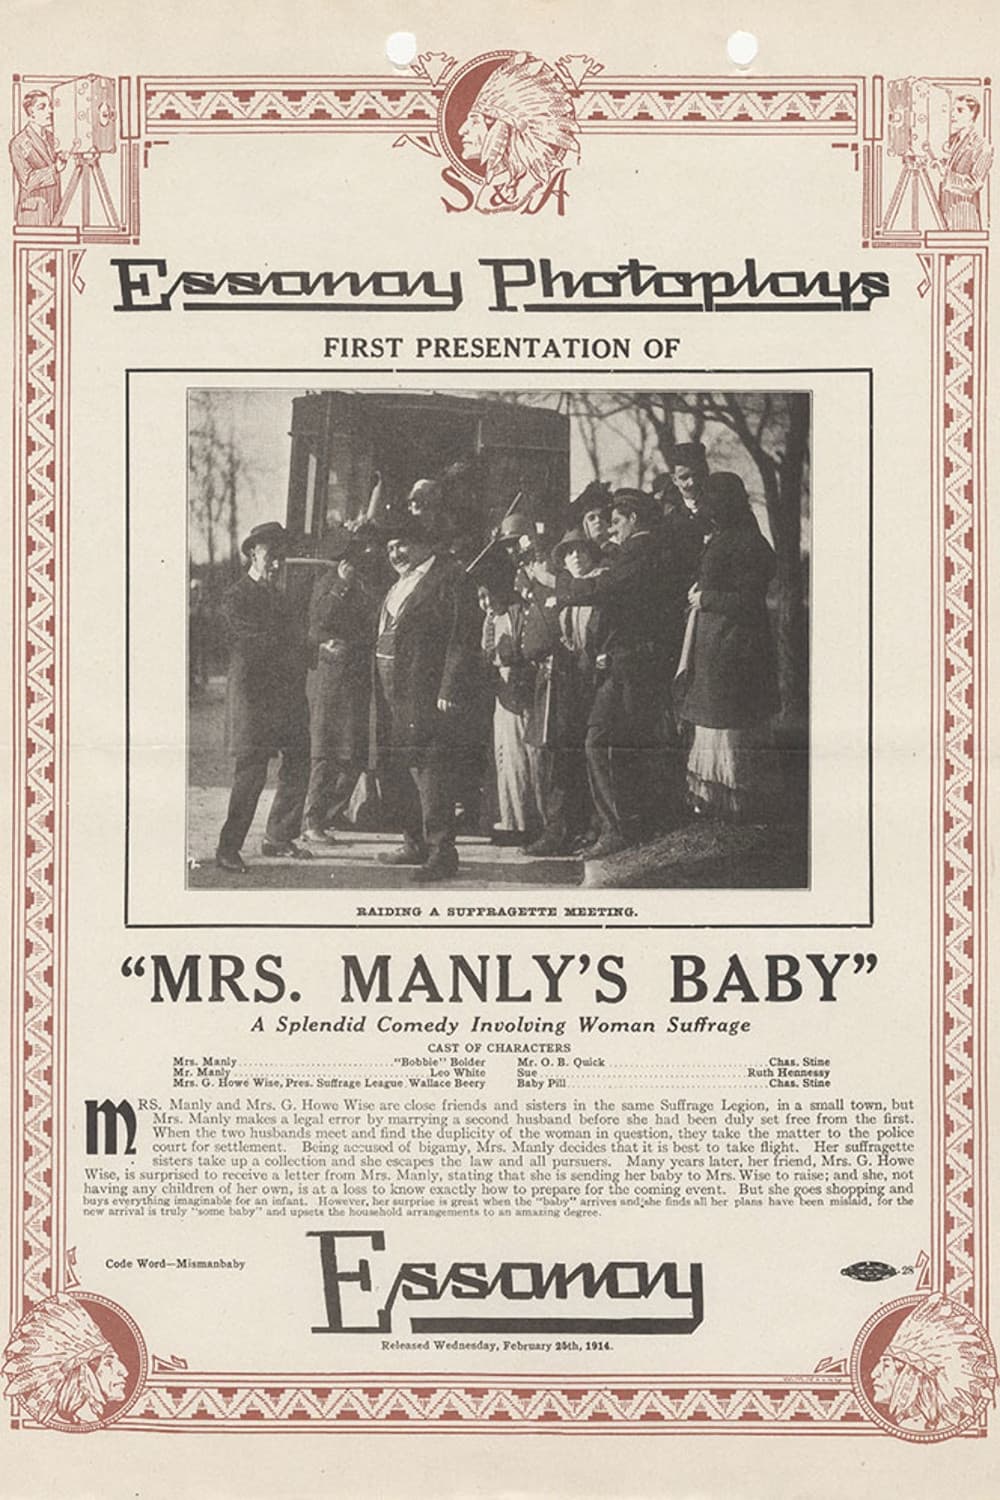 Mrs. Manly's Baby